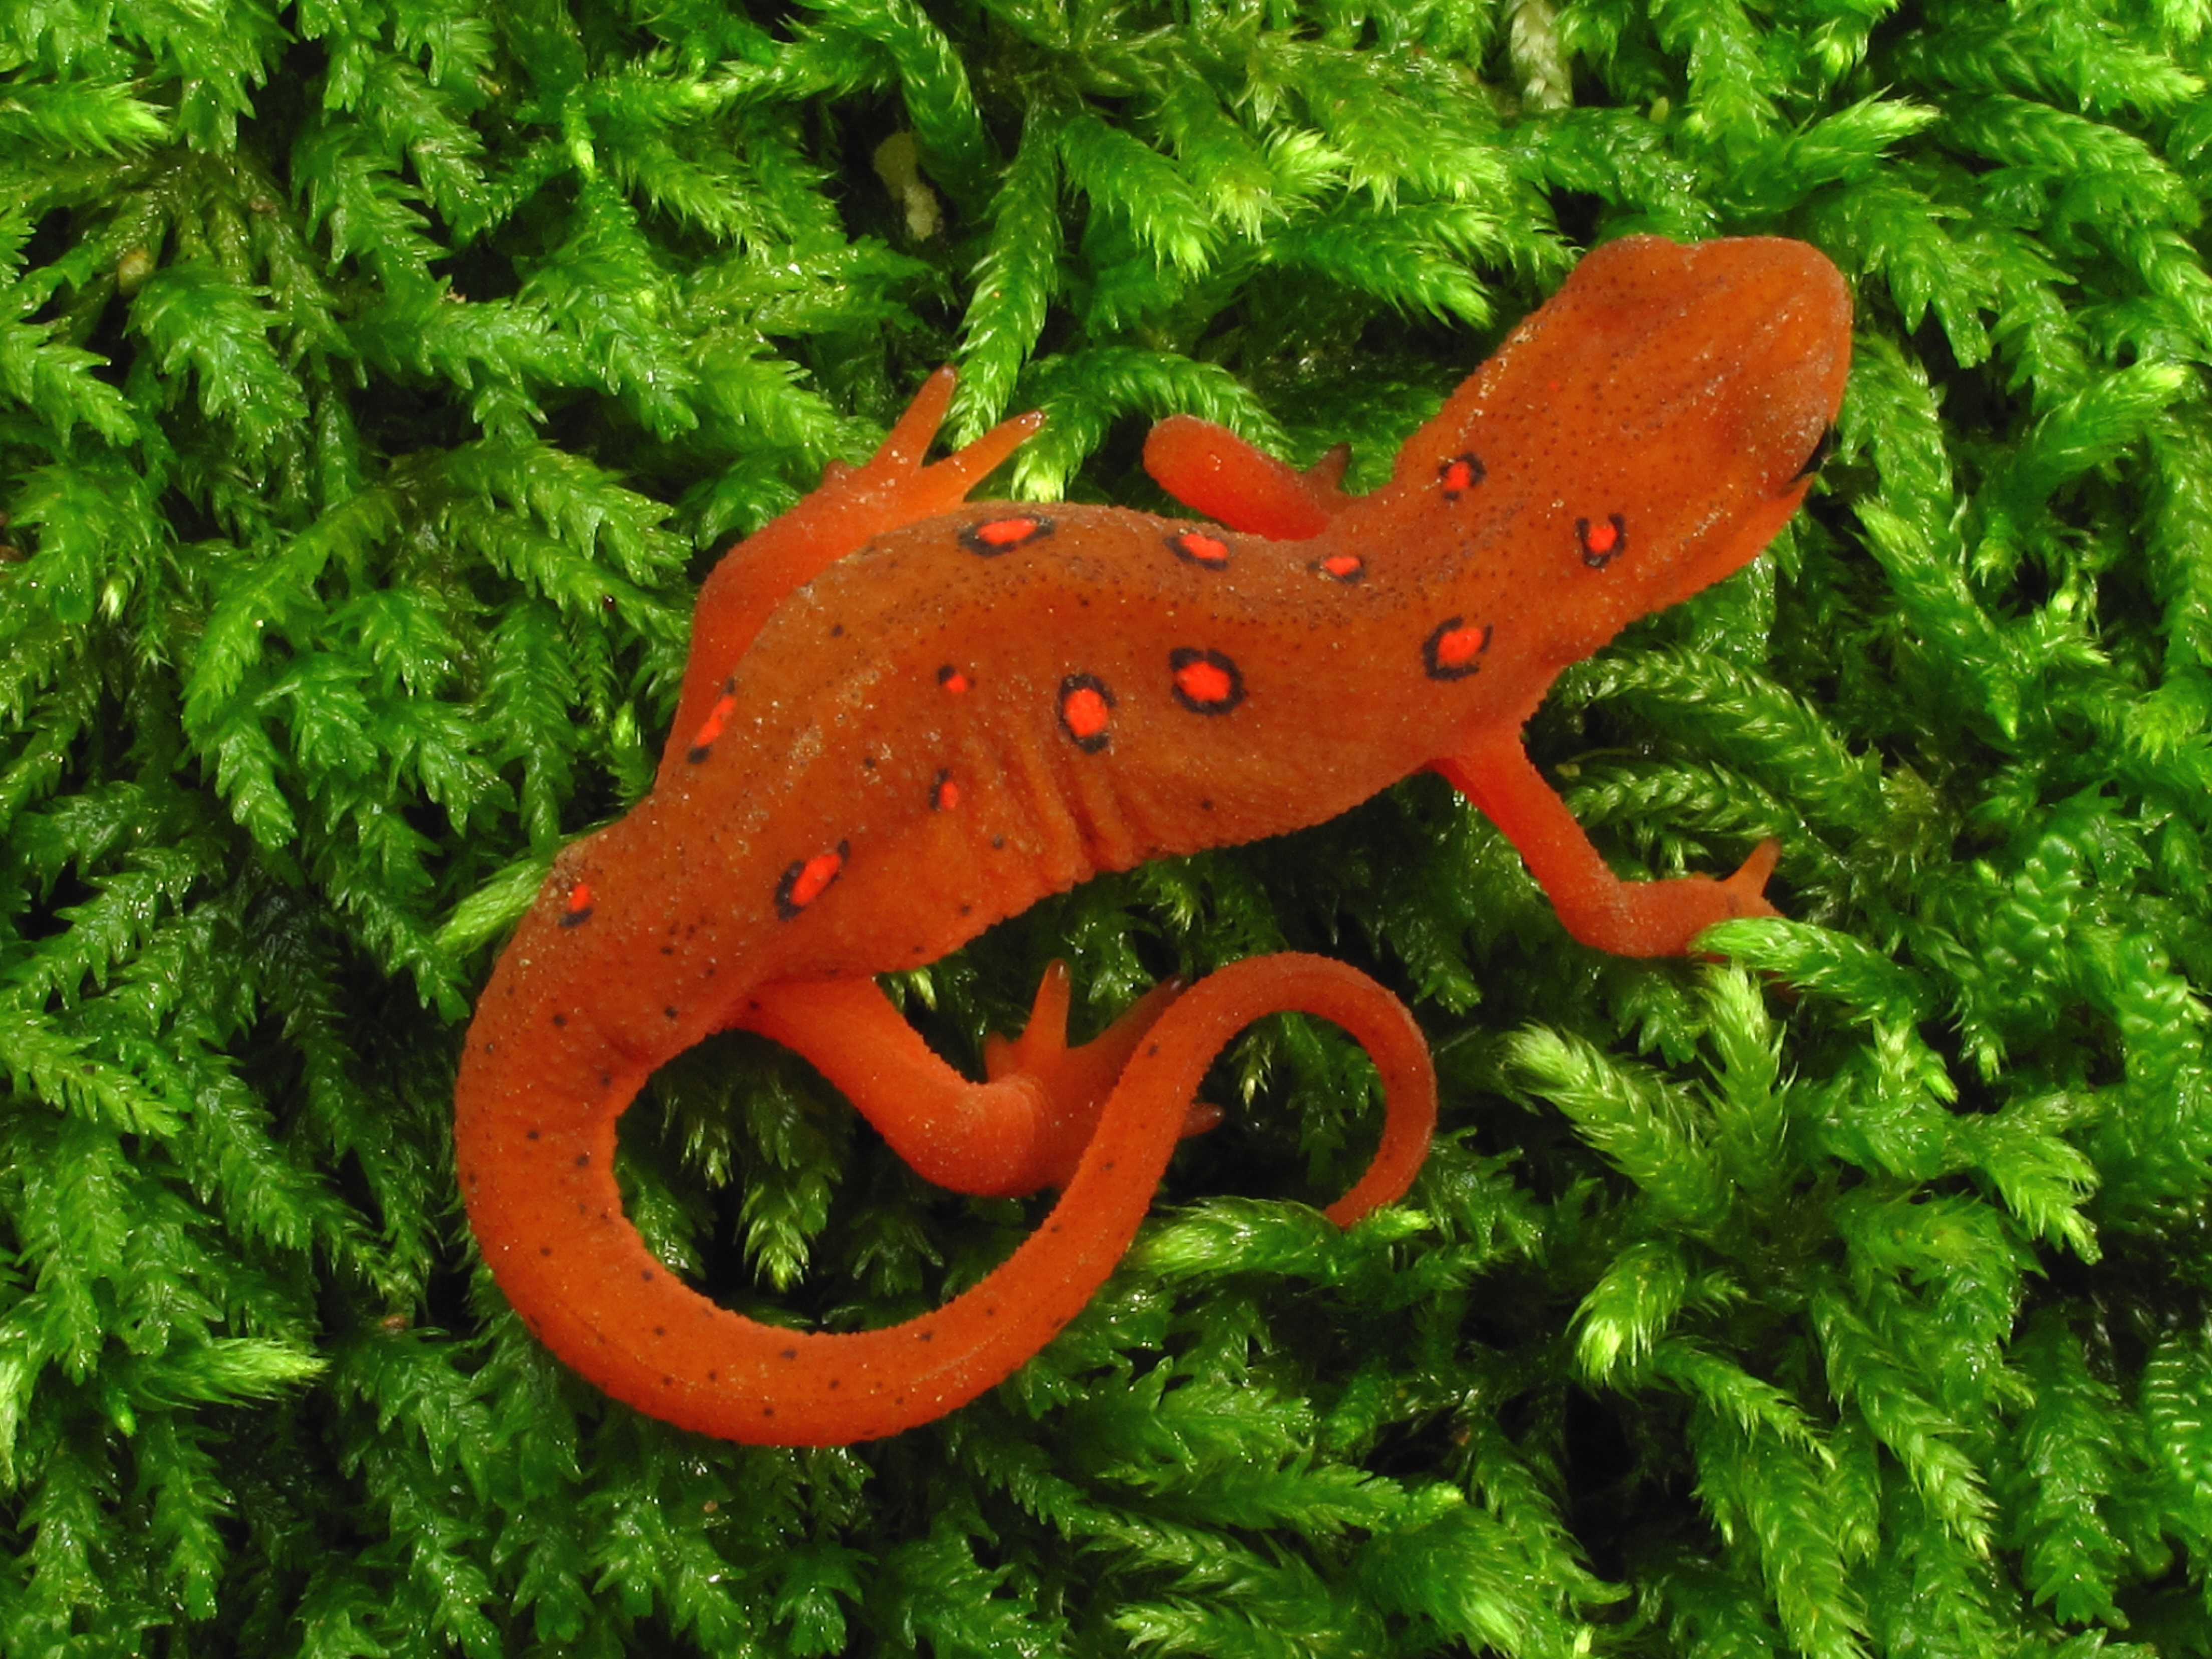 The eft stage of a red-spotted newt in Walker County, Georgia (Crockford-Pigeon Mountain Wildlife Management Area).<br />Photo by: Alan Cressler, USGS